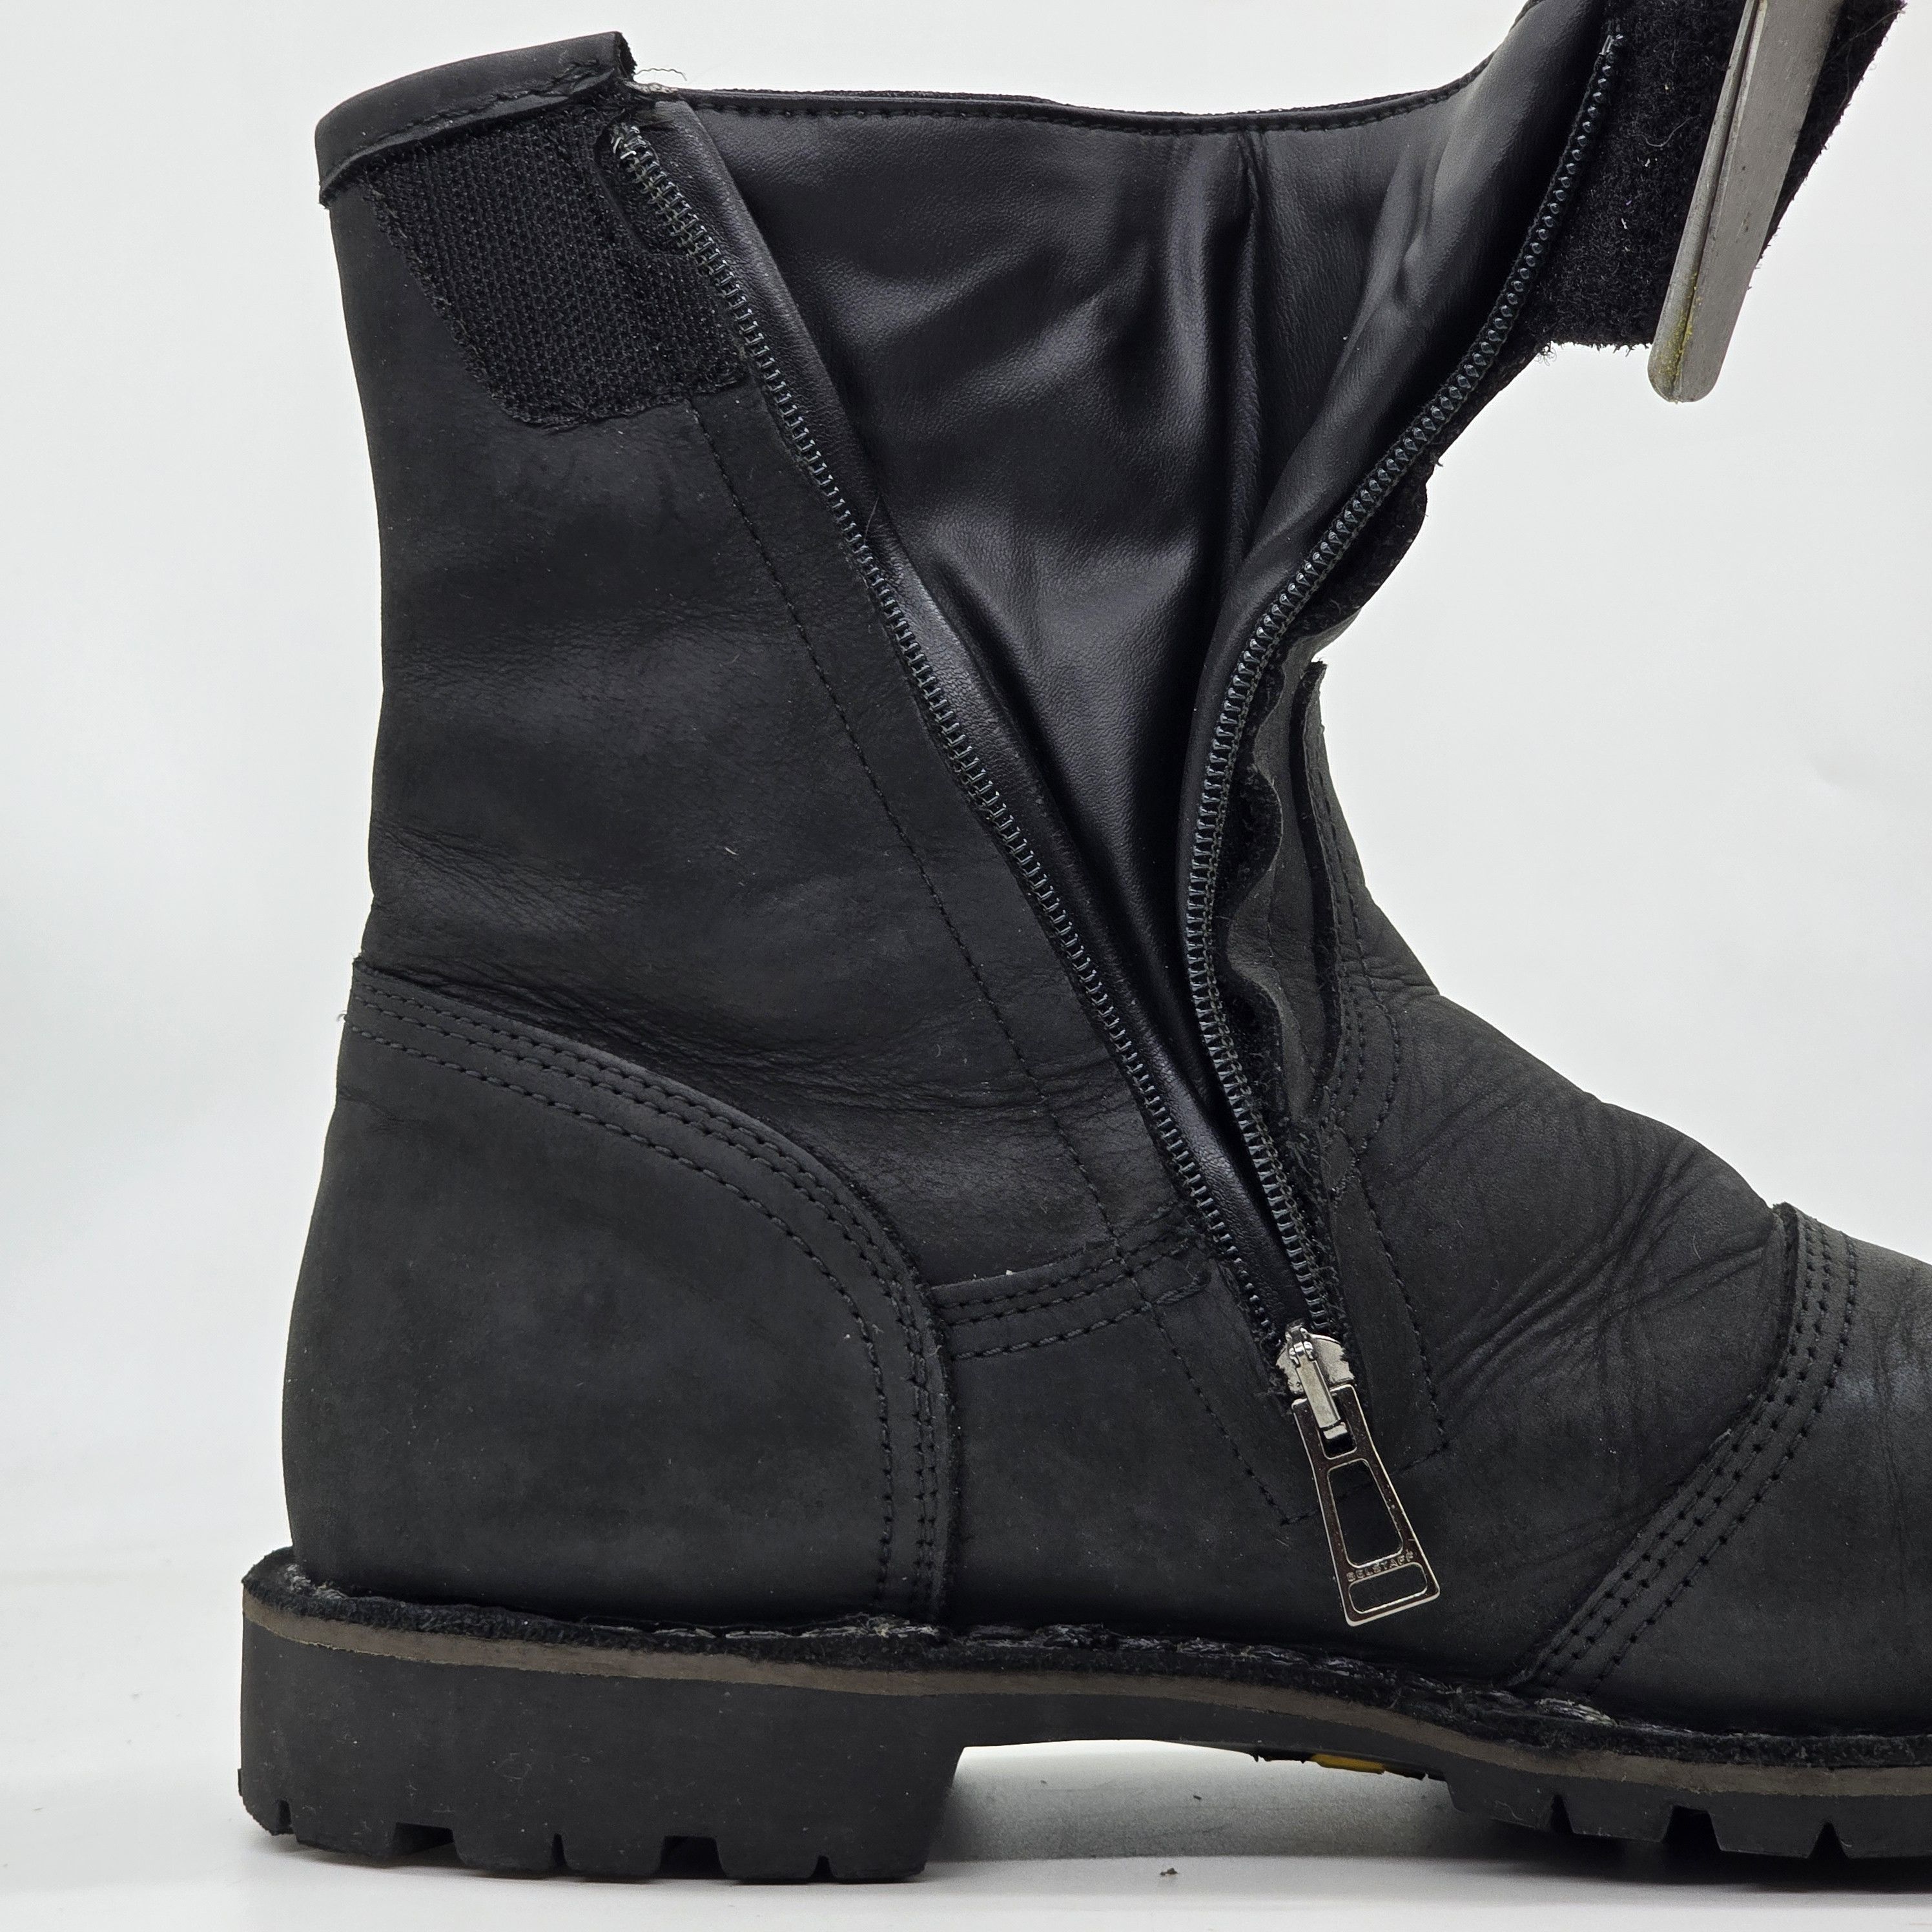 Belstaff - Duration Motorcycle Boots - 10